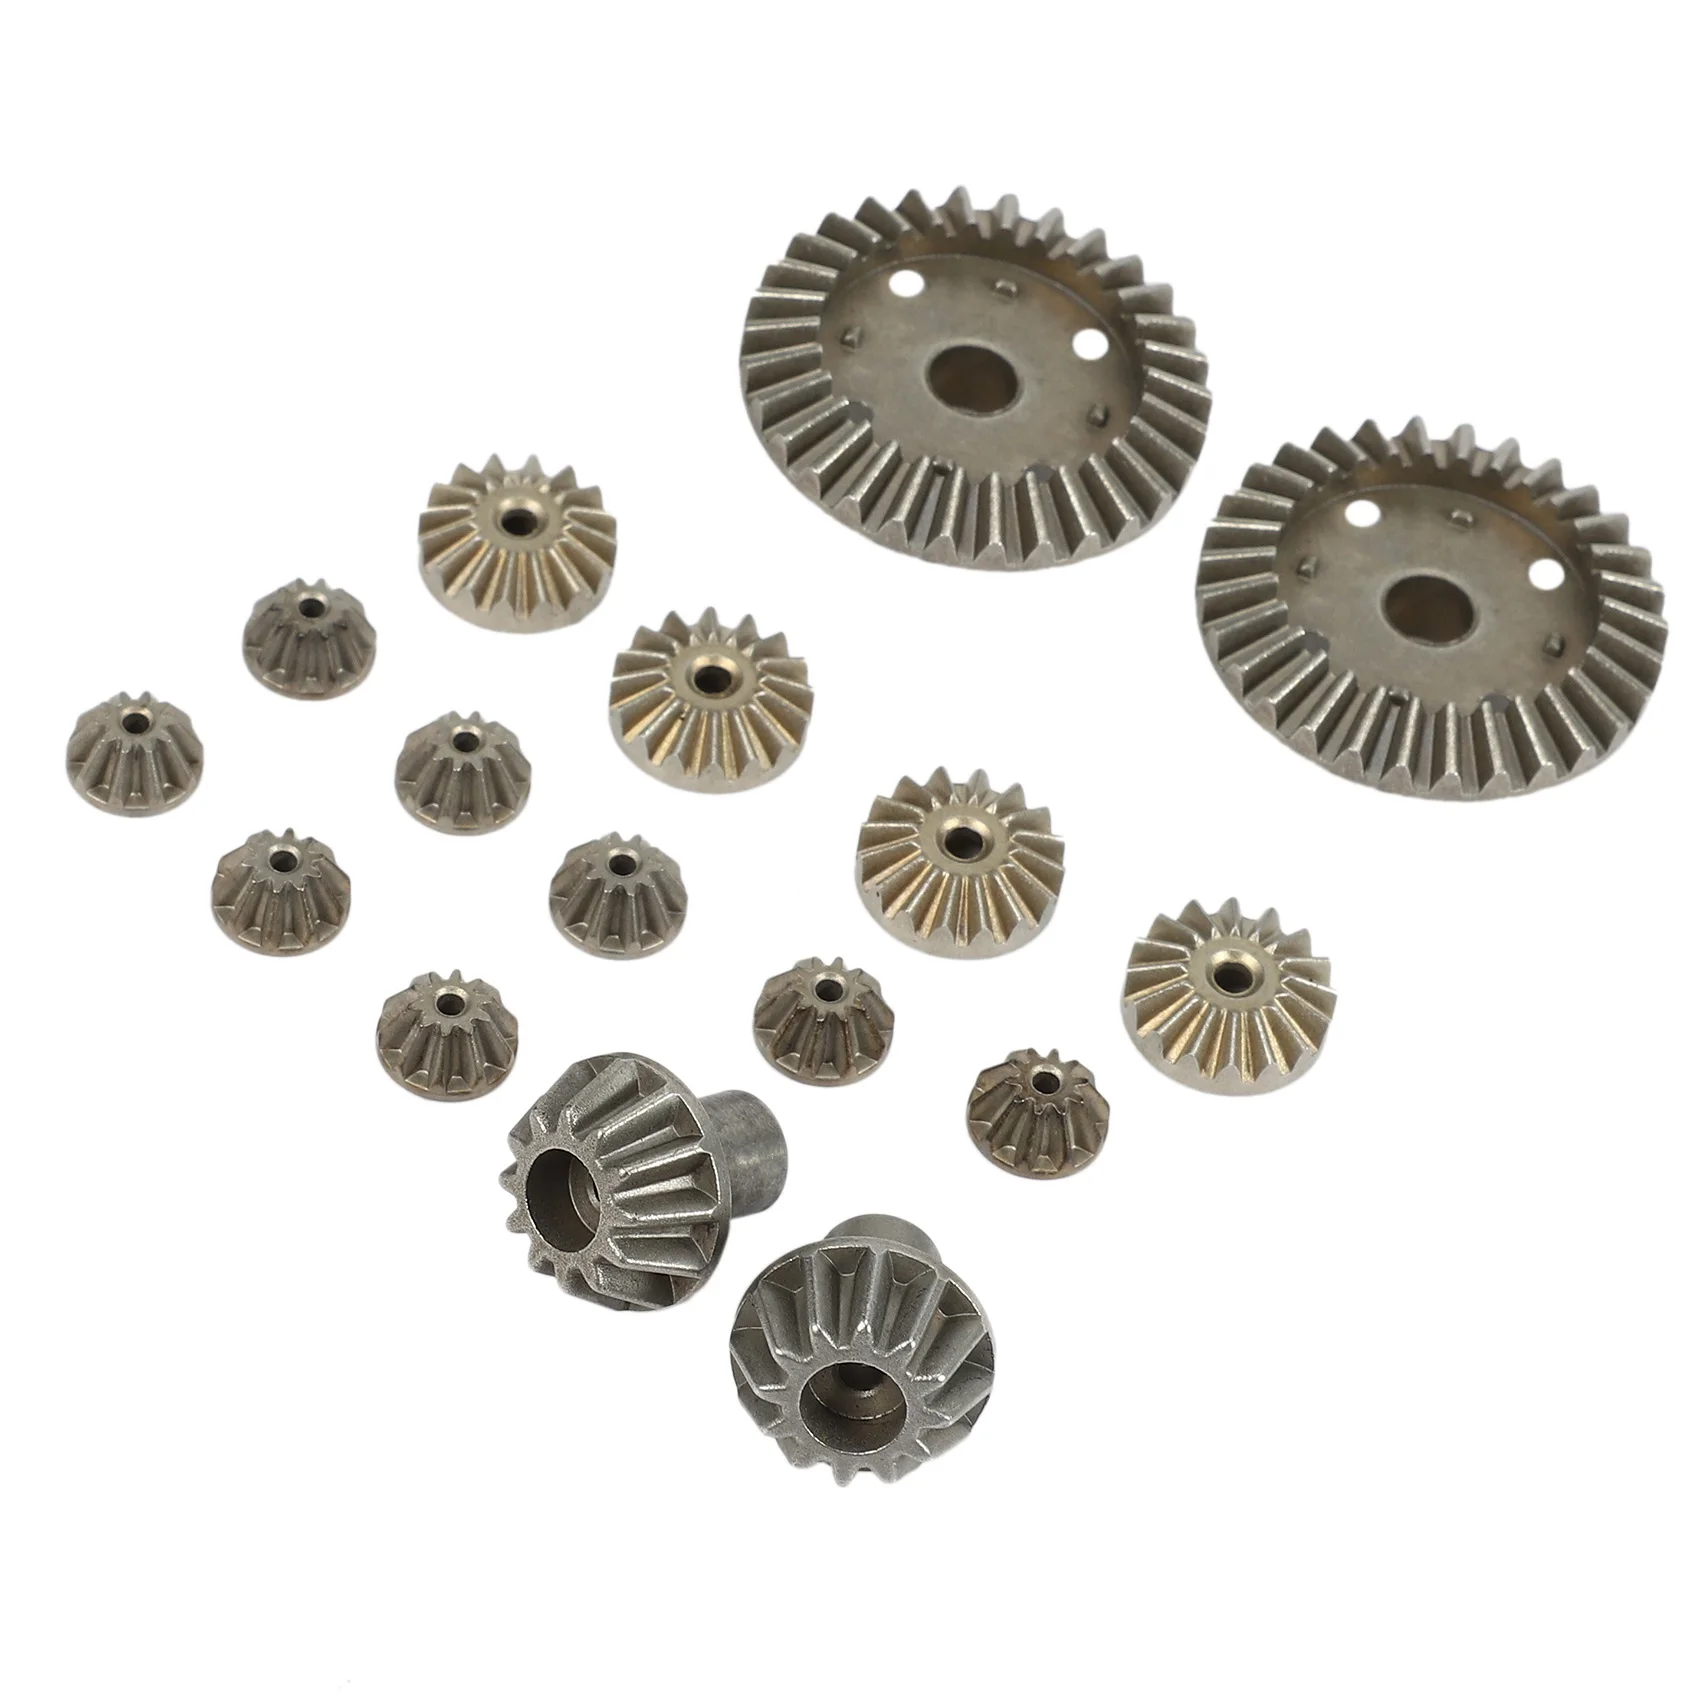 

Upgrade Metal Gear 30T 16T 10T Differential Driving Gears for Wltoys 144001 12428 12429 12423 12429 RC Car Spare Parts,16 Pcs